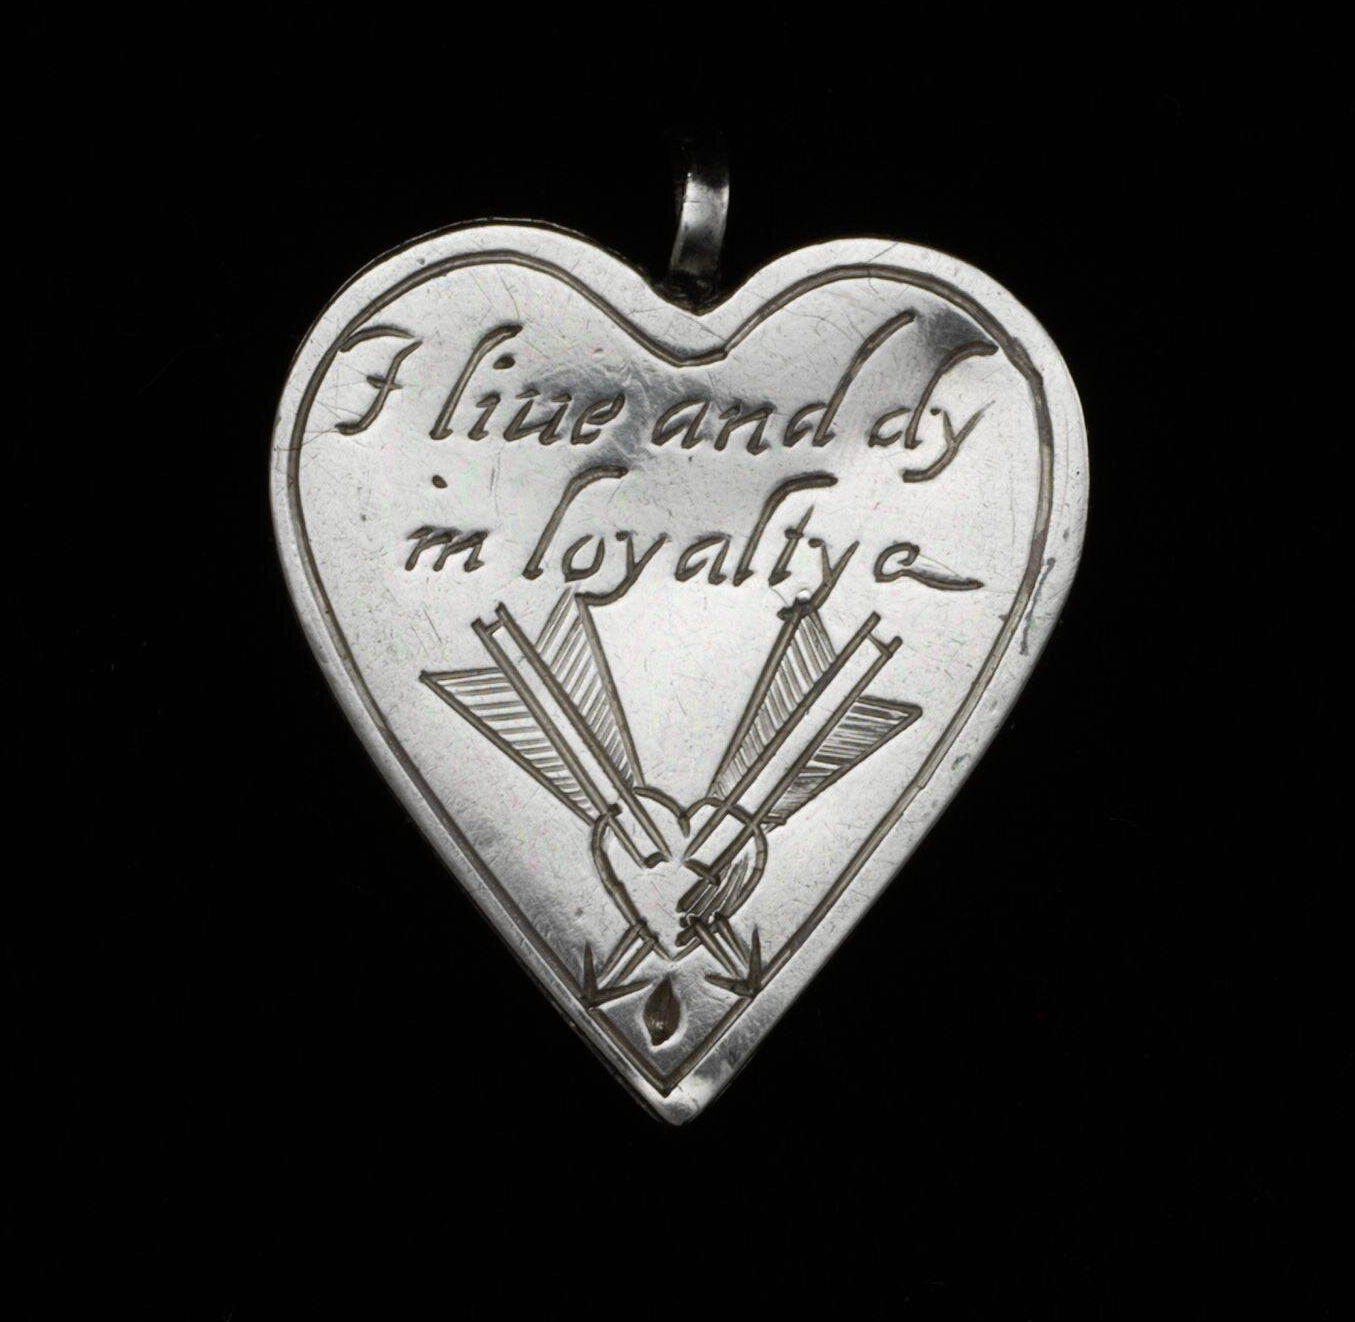 Following the execution of Charles I in 1649, commemorative jewelry, like this heart, was made for royalists as a sign of allegiance, 1649. The Victoria & Albert Museum.   